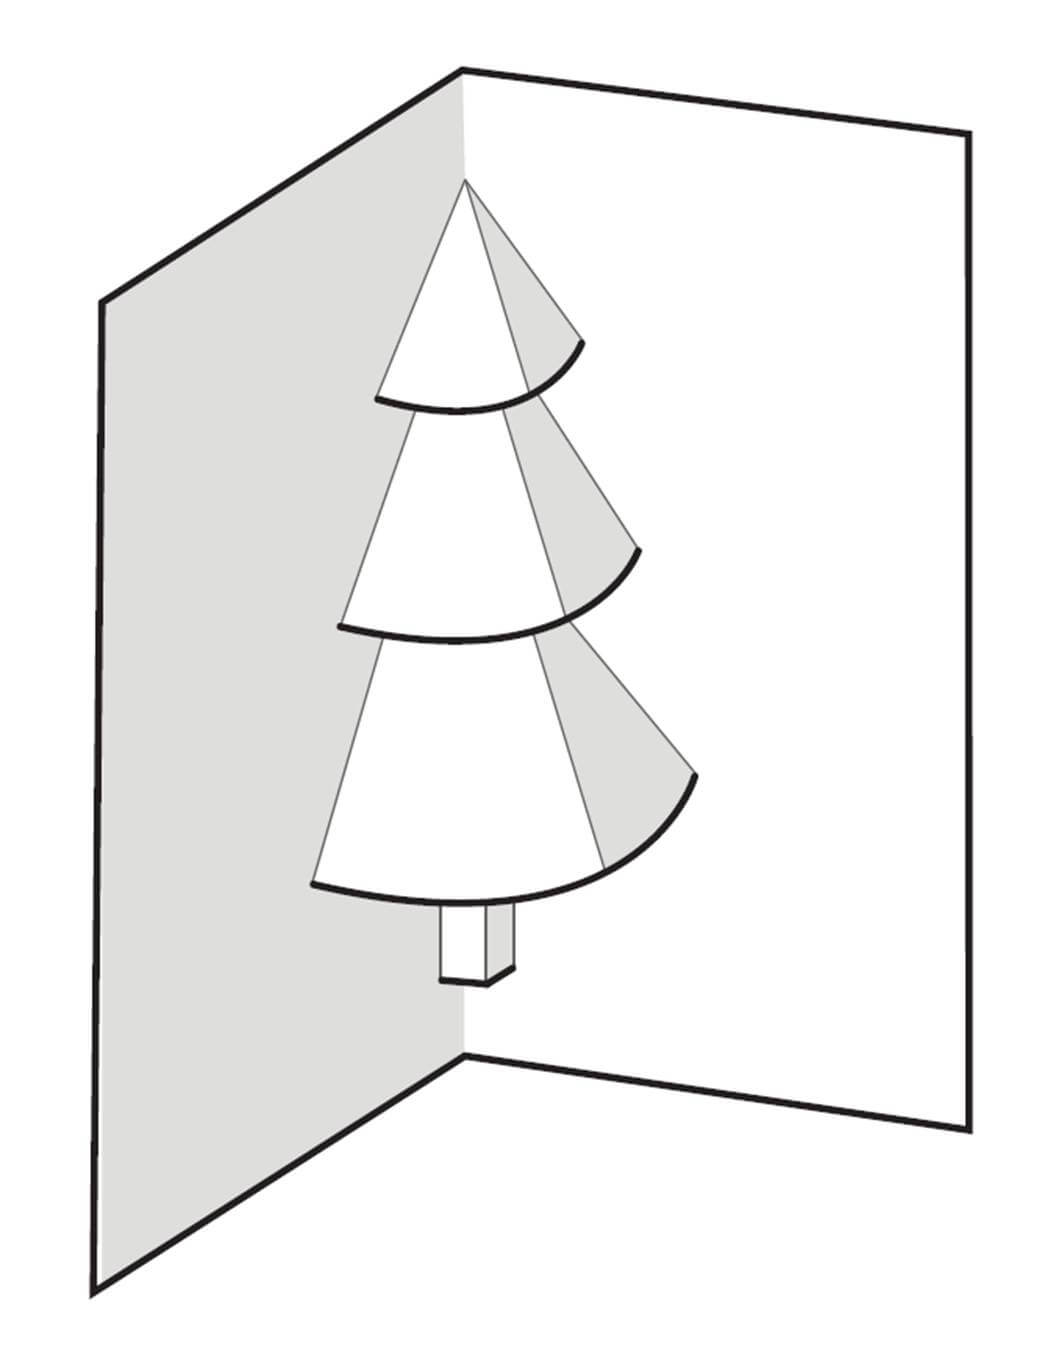 How To Make A Pop Up Christmas Tree Card: 6 Steps Throughout Pop Up Tree Card Template